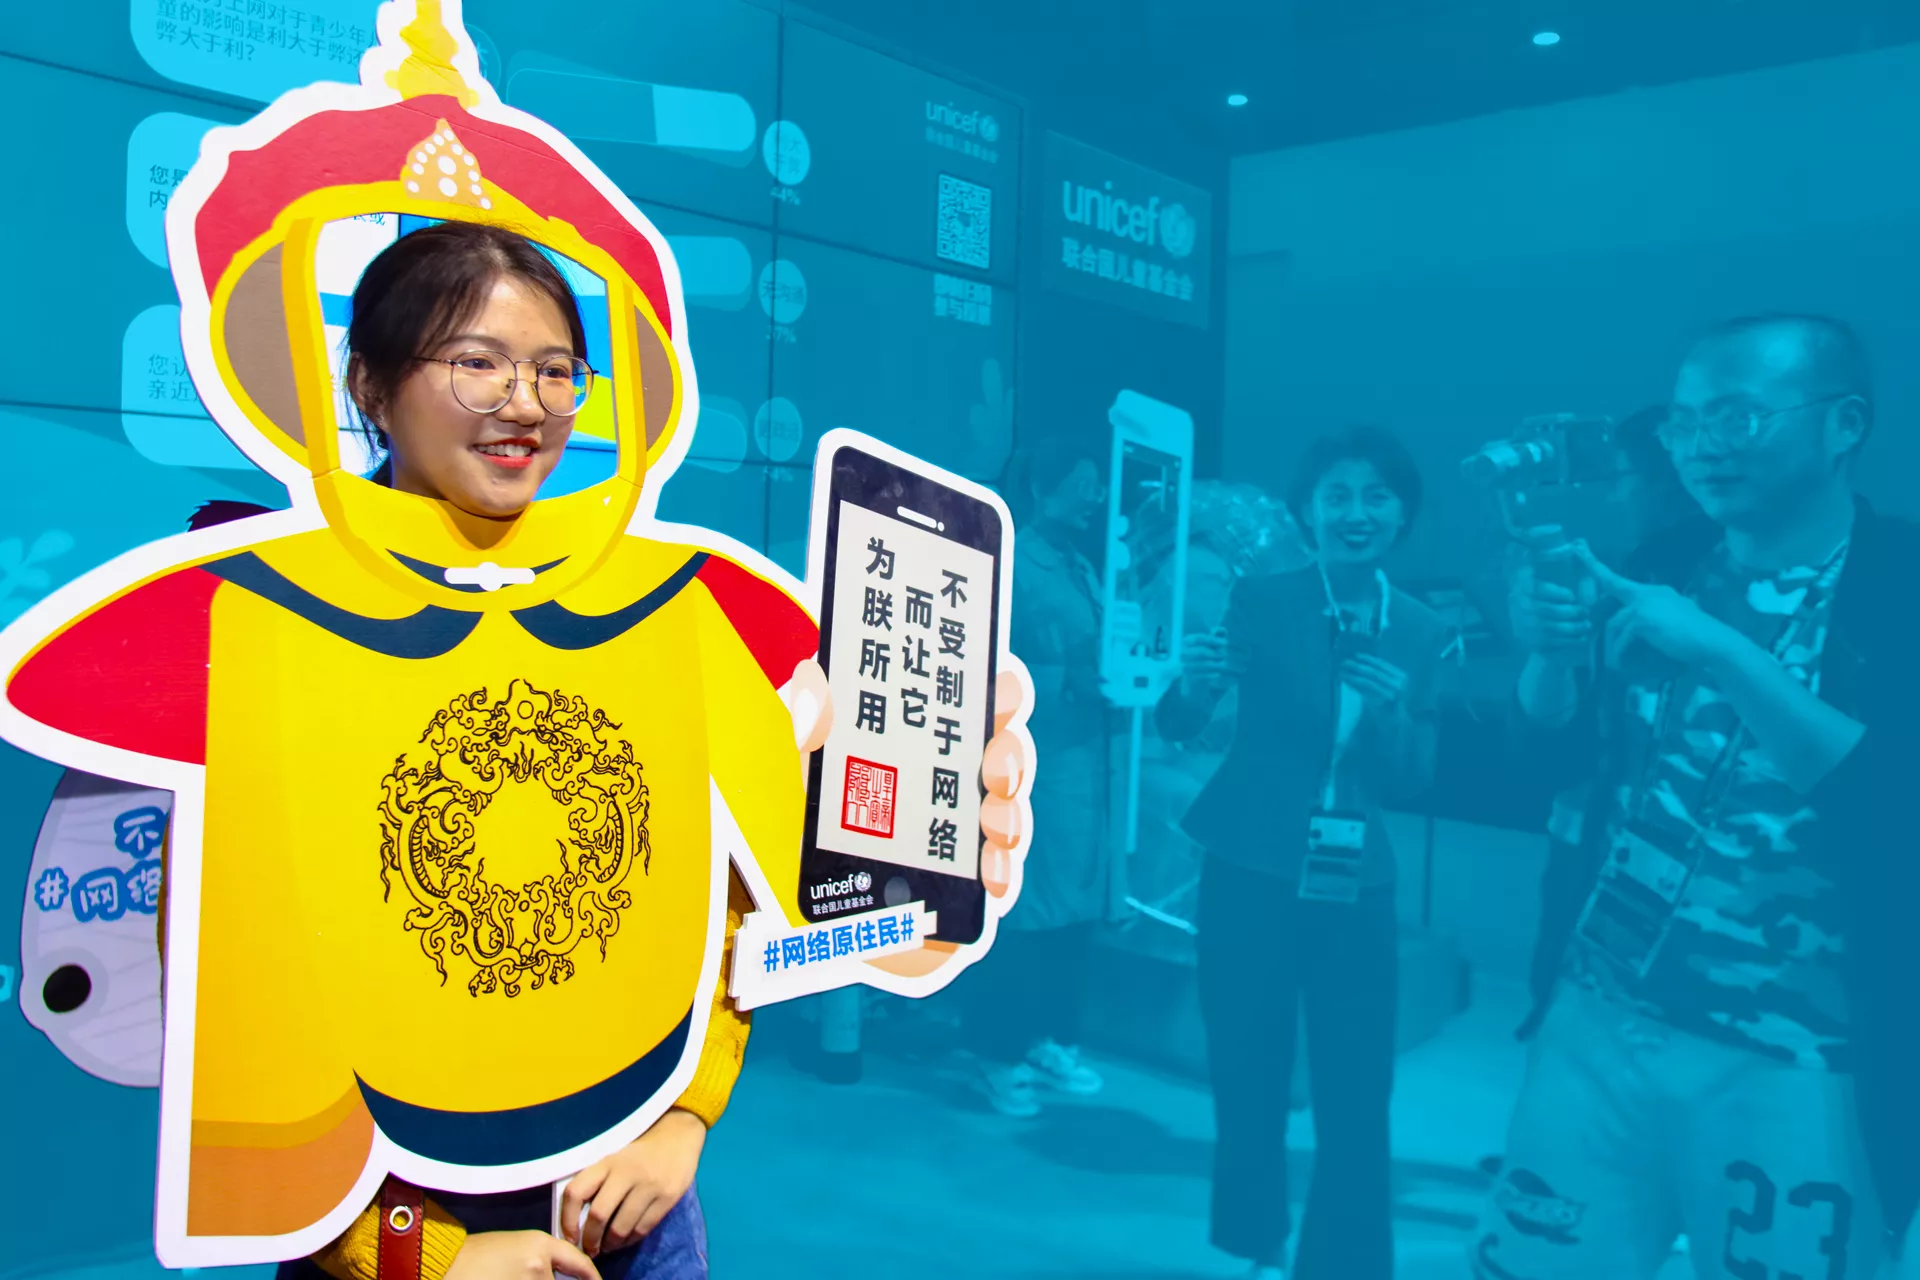 Media crew reports live from UNICEF’s exhibition booth at the World Internet Expo in Wuzhen, China, in November 2018.